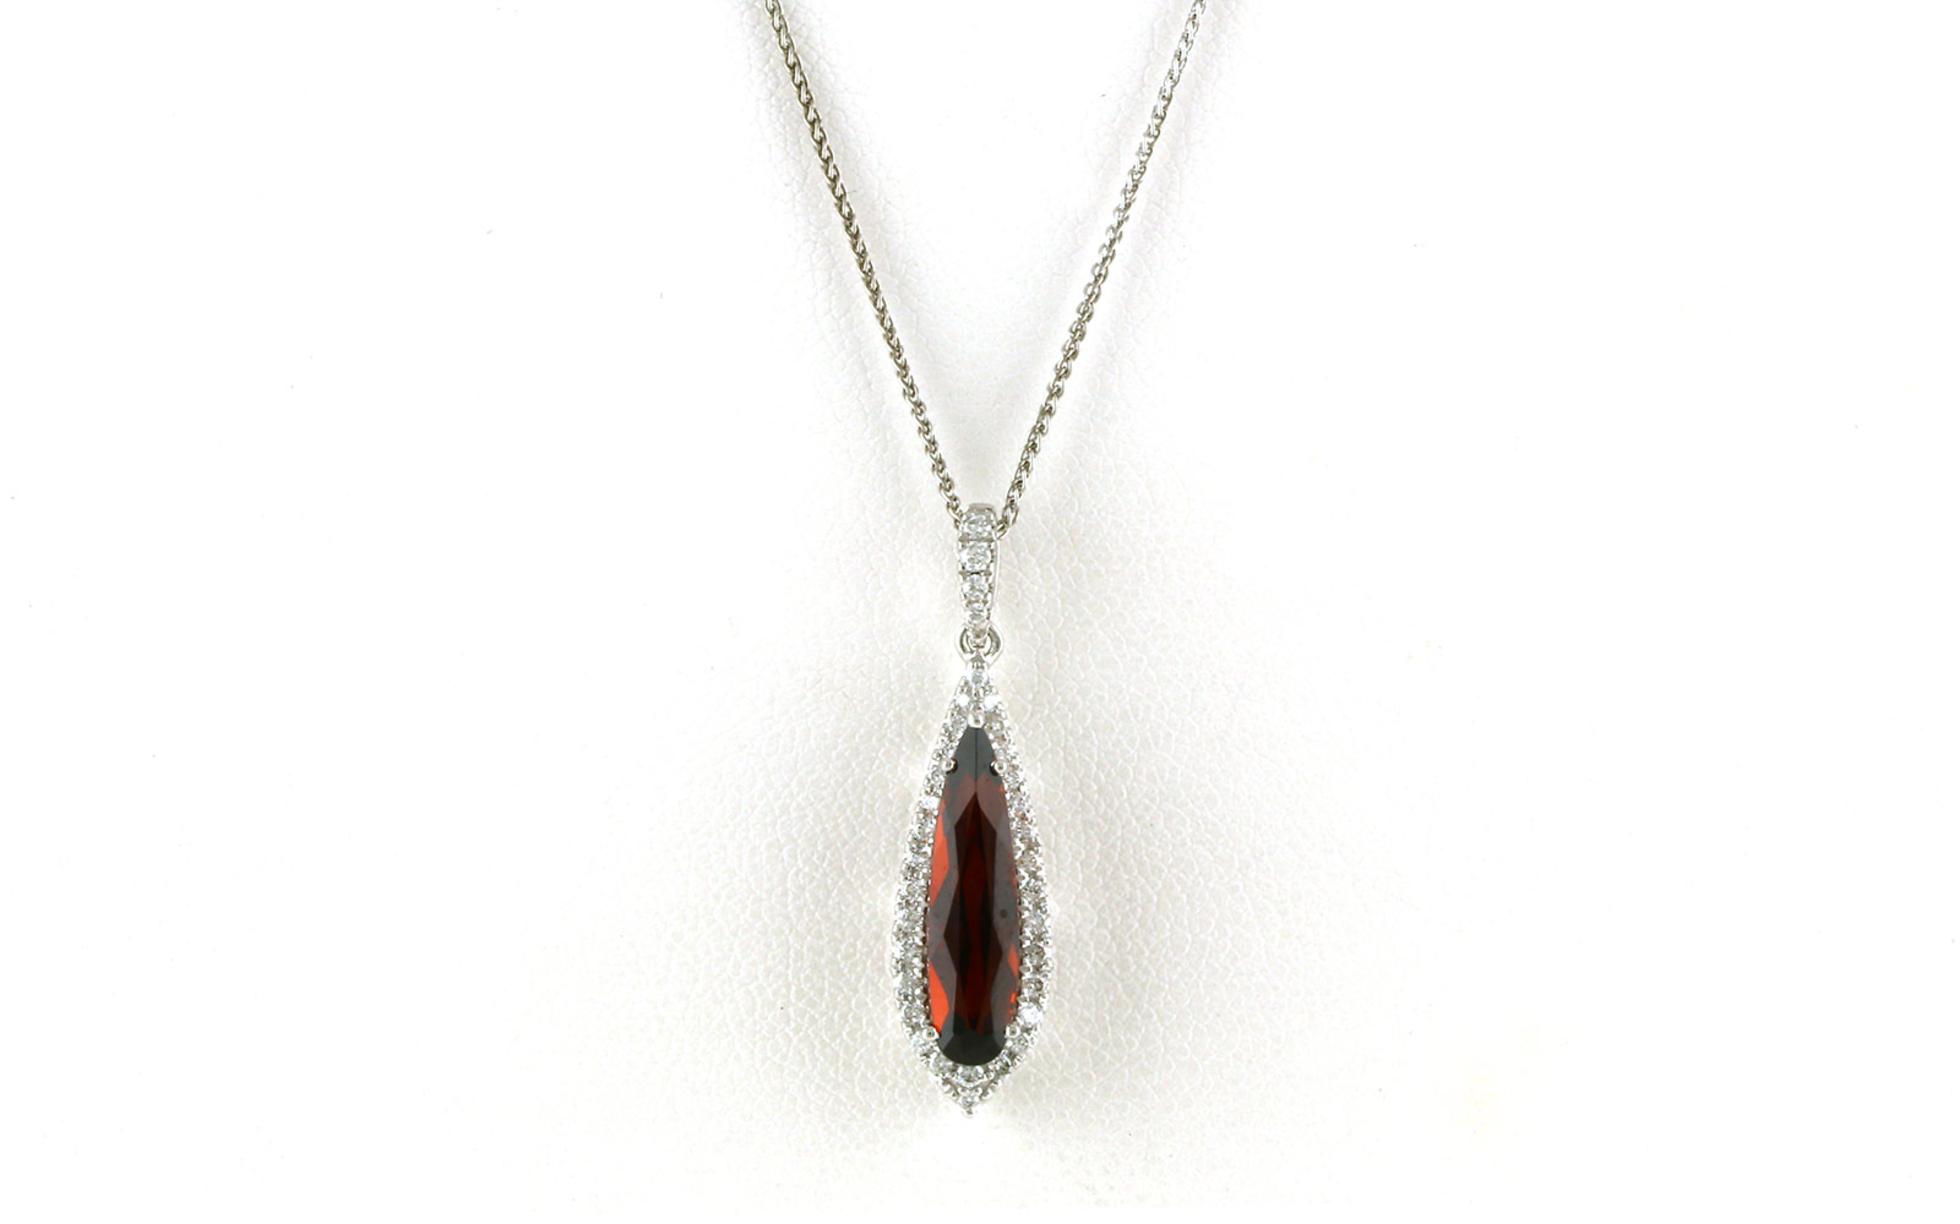 Halo-style Long Teardrop Pear-cut Garnet and Diamond Necklace in White Gold (2.24cts TWT)